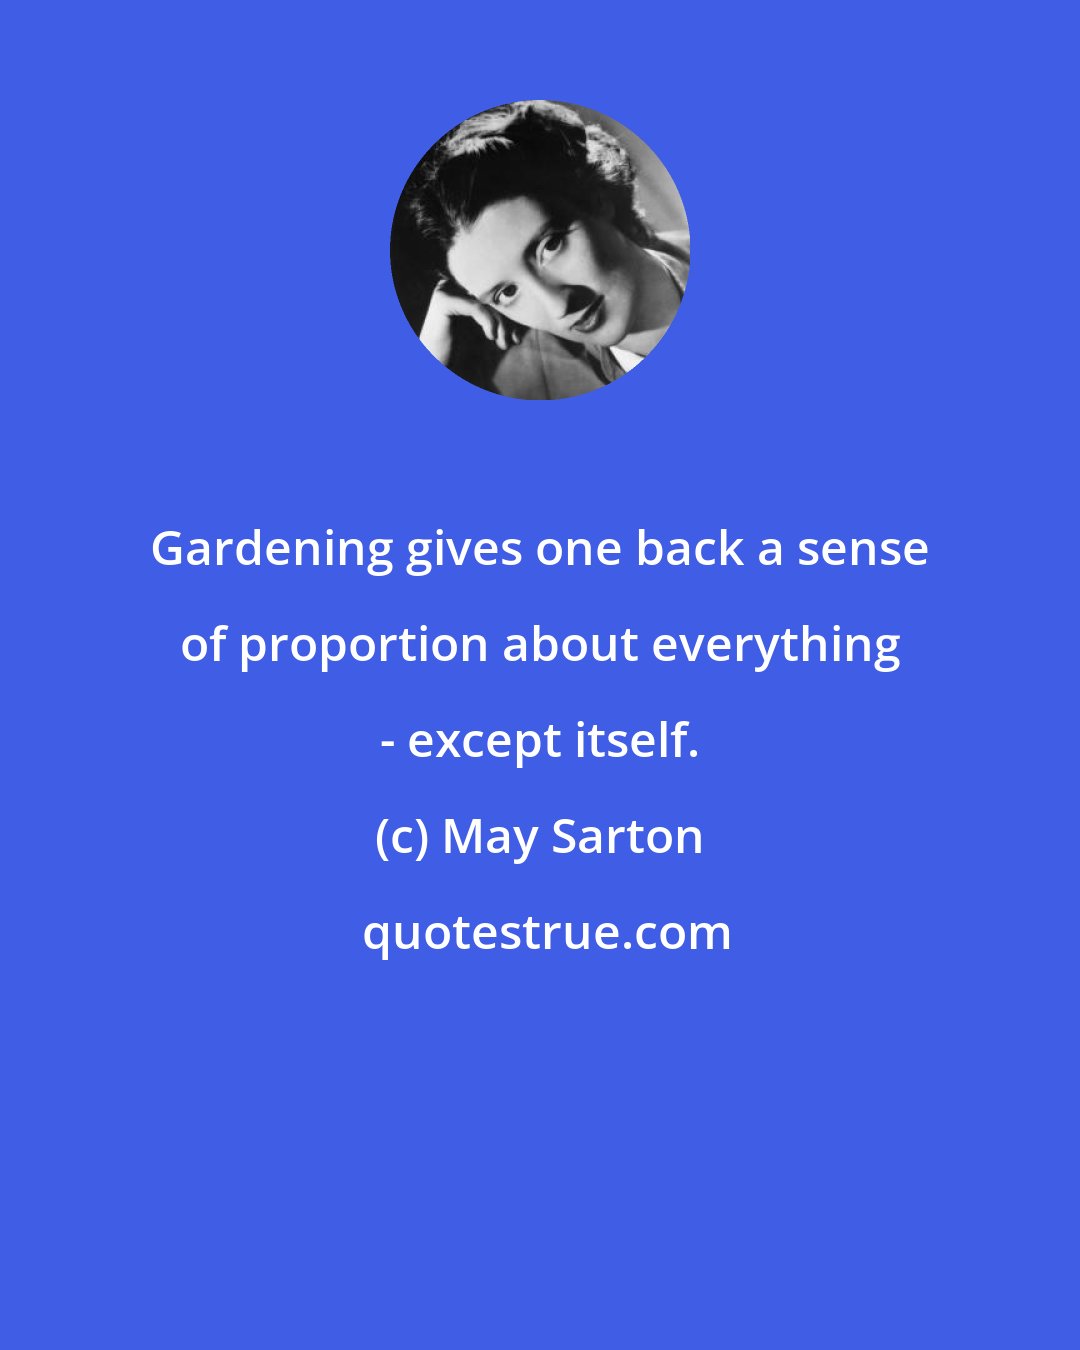 May Sarton: Gardening gives one back a sense of proportion about everything - except itself.